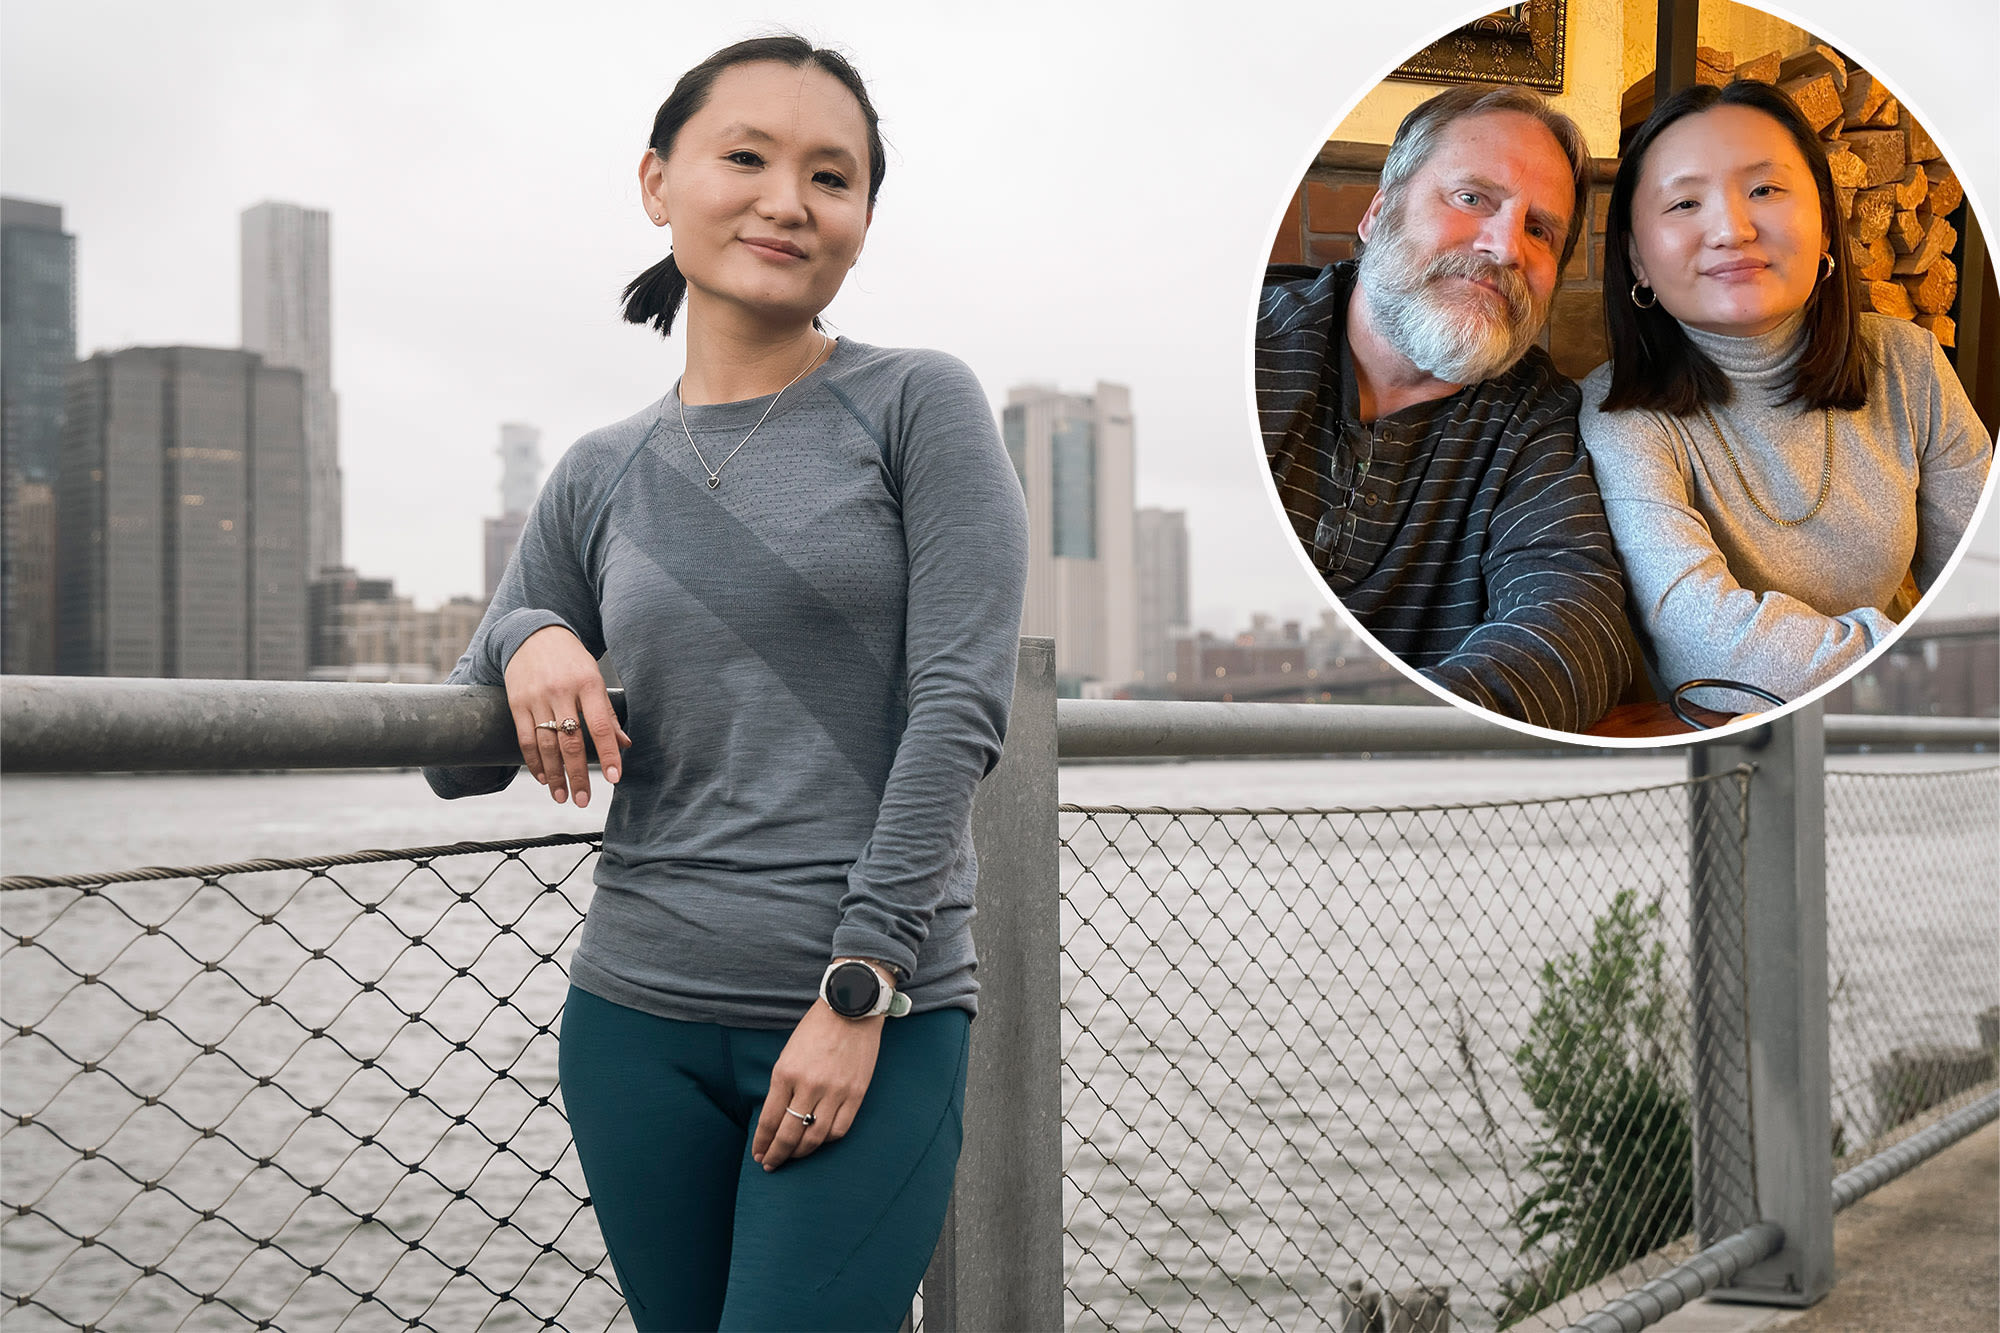 NYC woman to run Brooklyn half-marathon after ‘jarring’ family tragedy that left dad and uncle dead